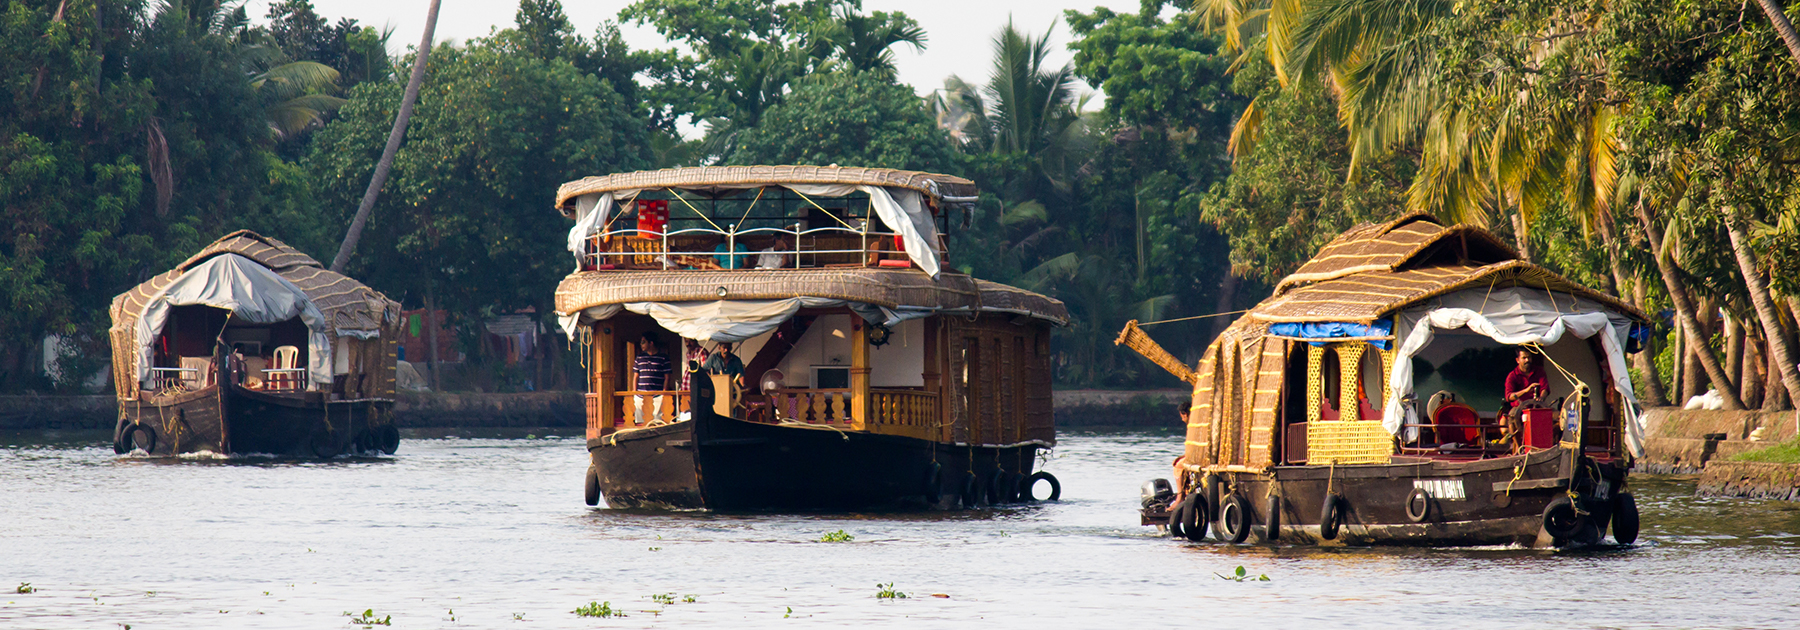 Houseboats in Alleppey, Kerala. (Saad Faruque, licensed under CC BY-SA 2.0)